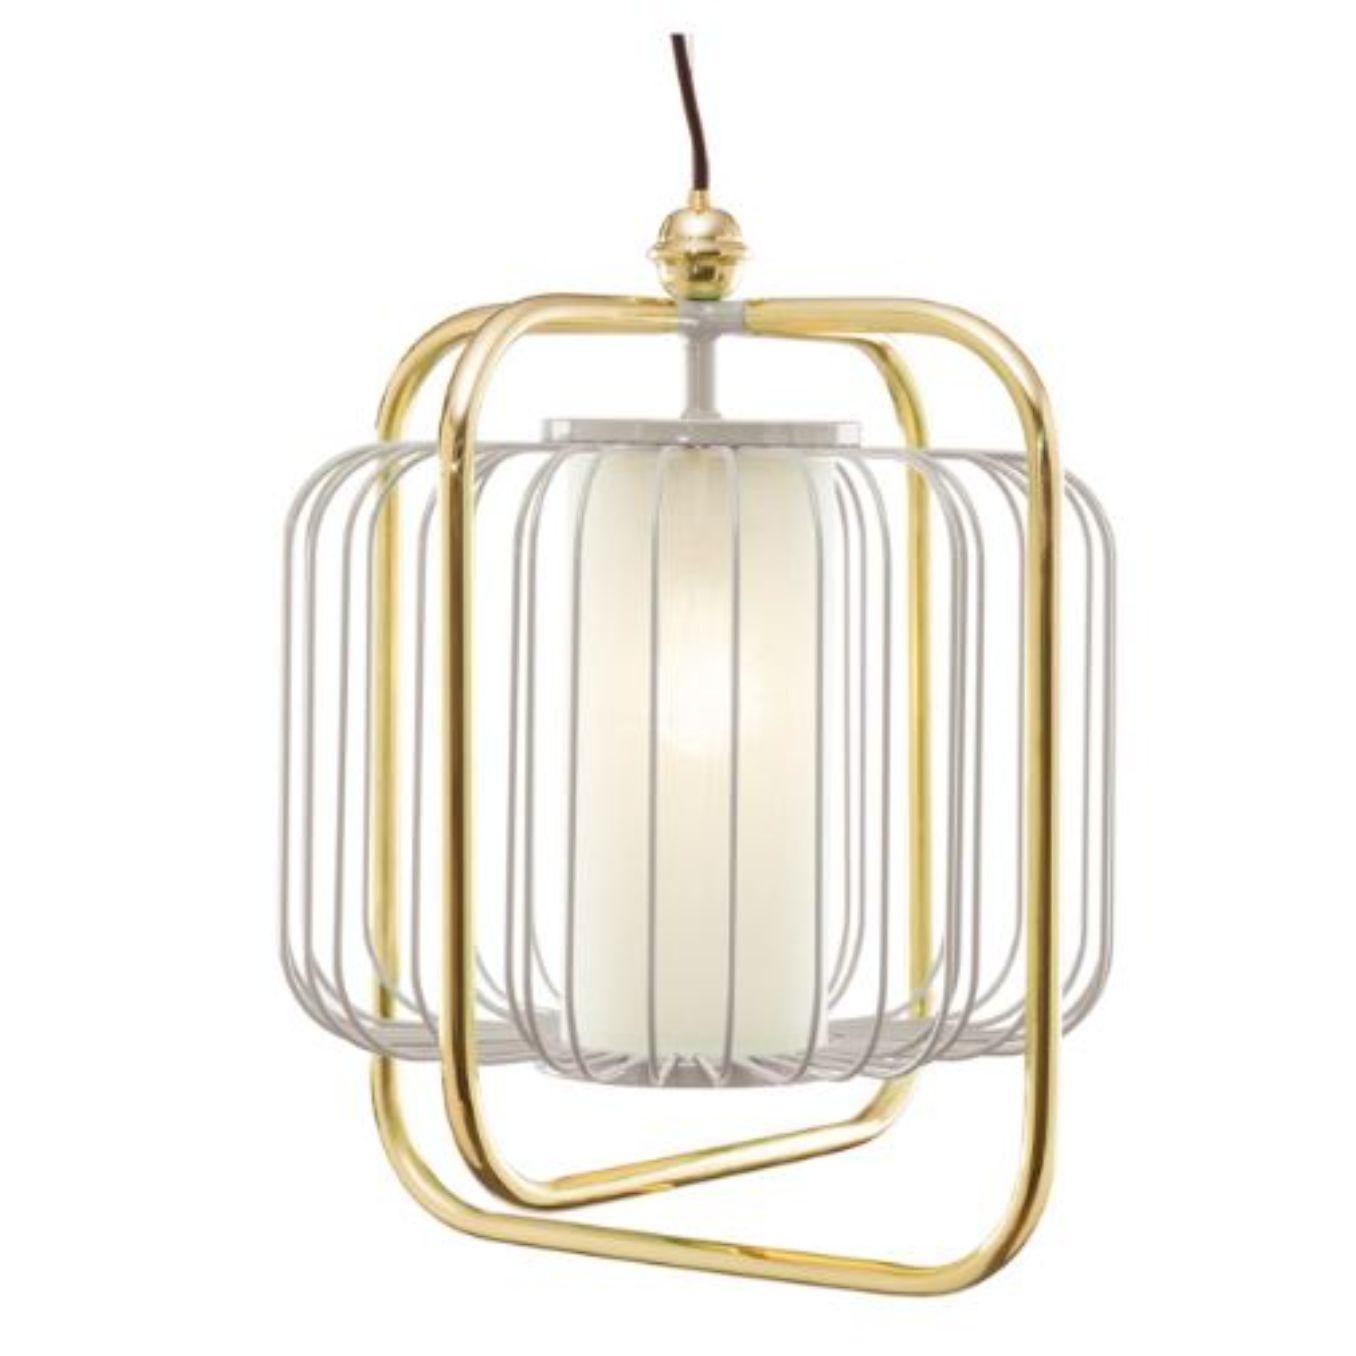 Brass and Taupe Jules III suspension lamp by Dooq
Dimensions: W 38 x D 38 x H 44 cm
Materials: lacquered metal, polished or brushed metal, brass.
abat-jour: cotton
Also available in different colours and